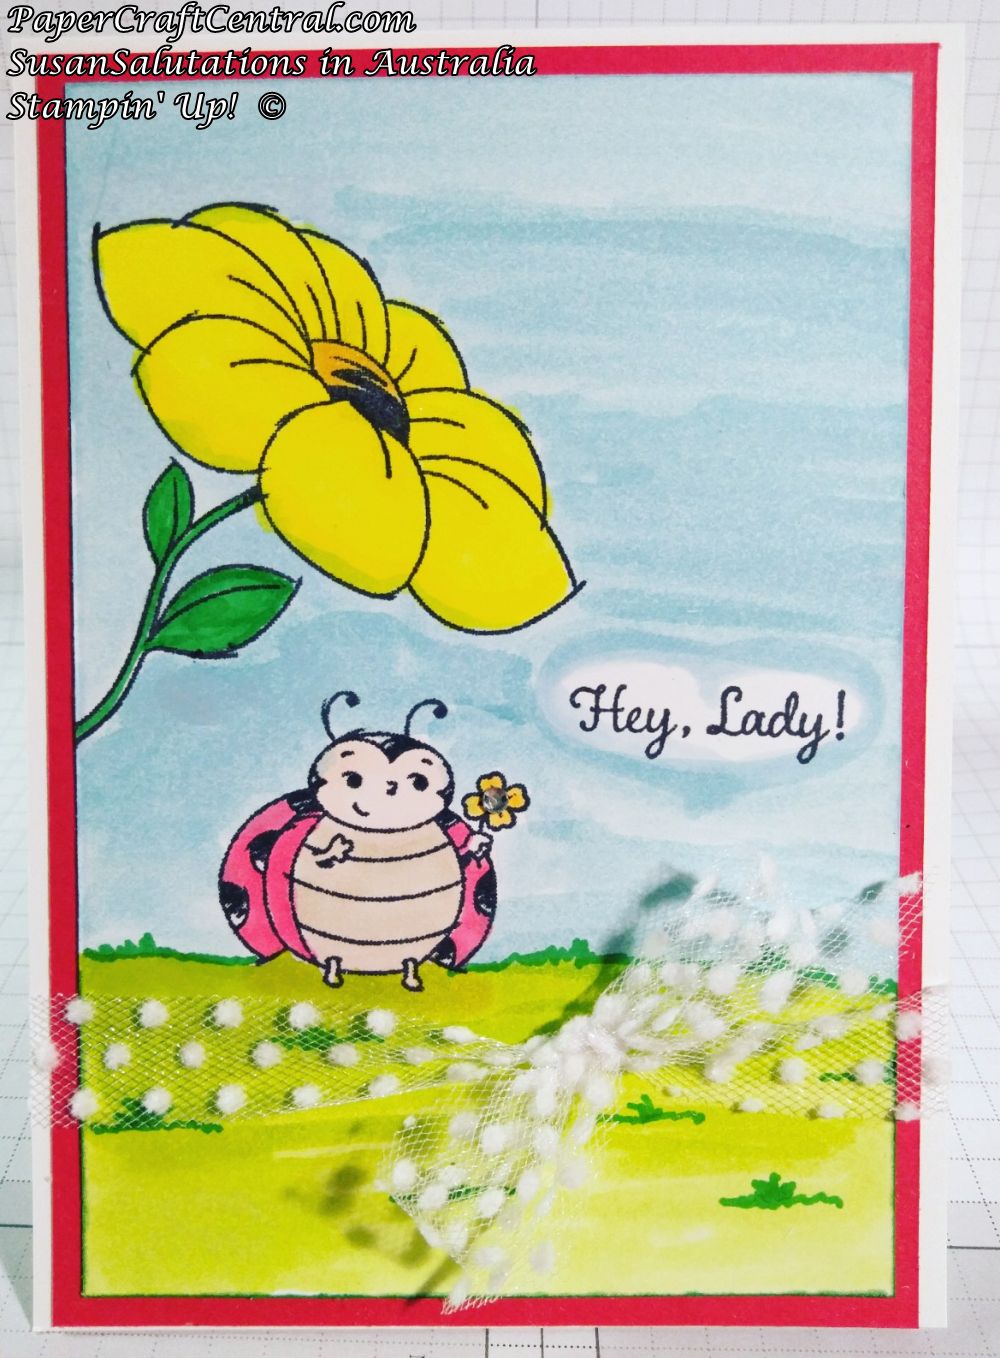 For this Little Ladybug card I stamped the ladybug, coloured her with Stampin' Blends, then masked her off to aqua paint the background with reinkers.